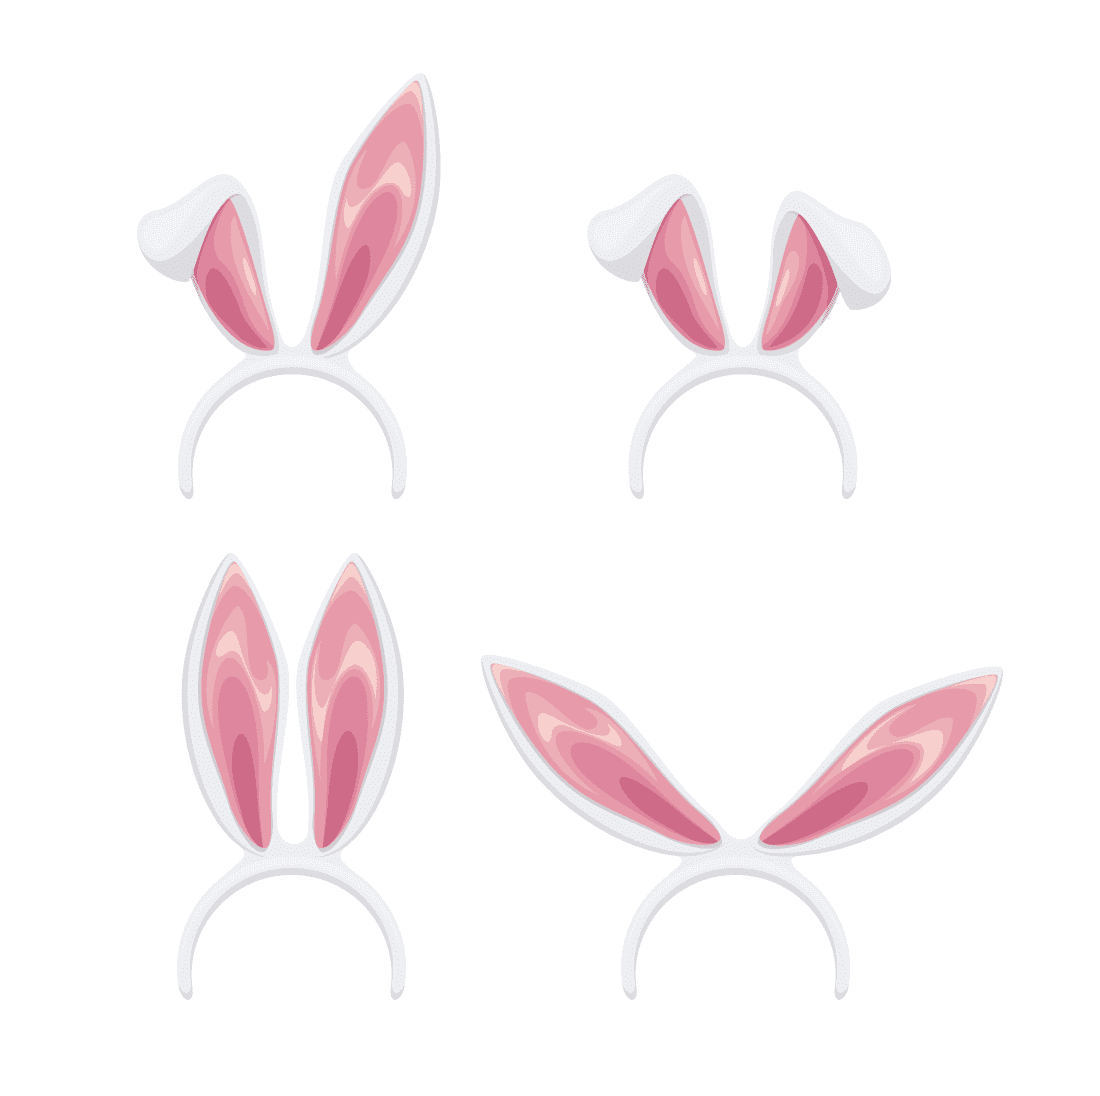 Set of three pink bunny ears on a white background.